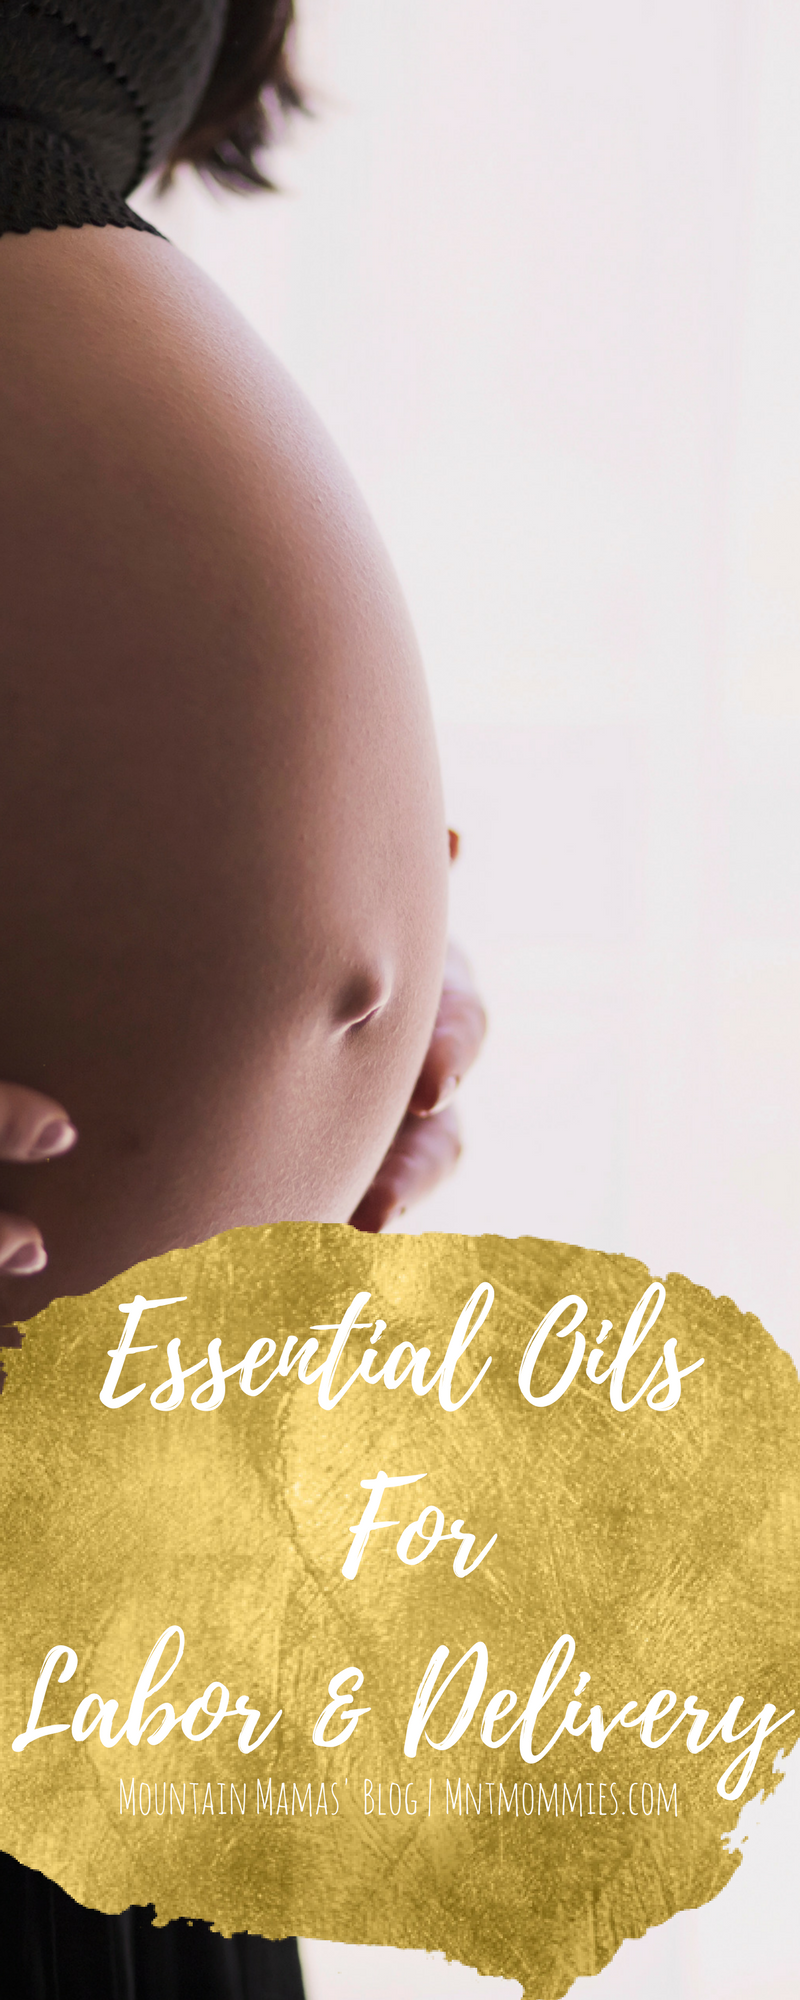 Essential Oils For Labor and Delivery | Mountain Mamas' Blog | Mntmommies.com | #baby #pregnancy #pregnant #birth #naturalbirth